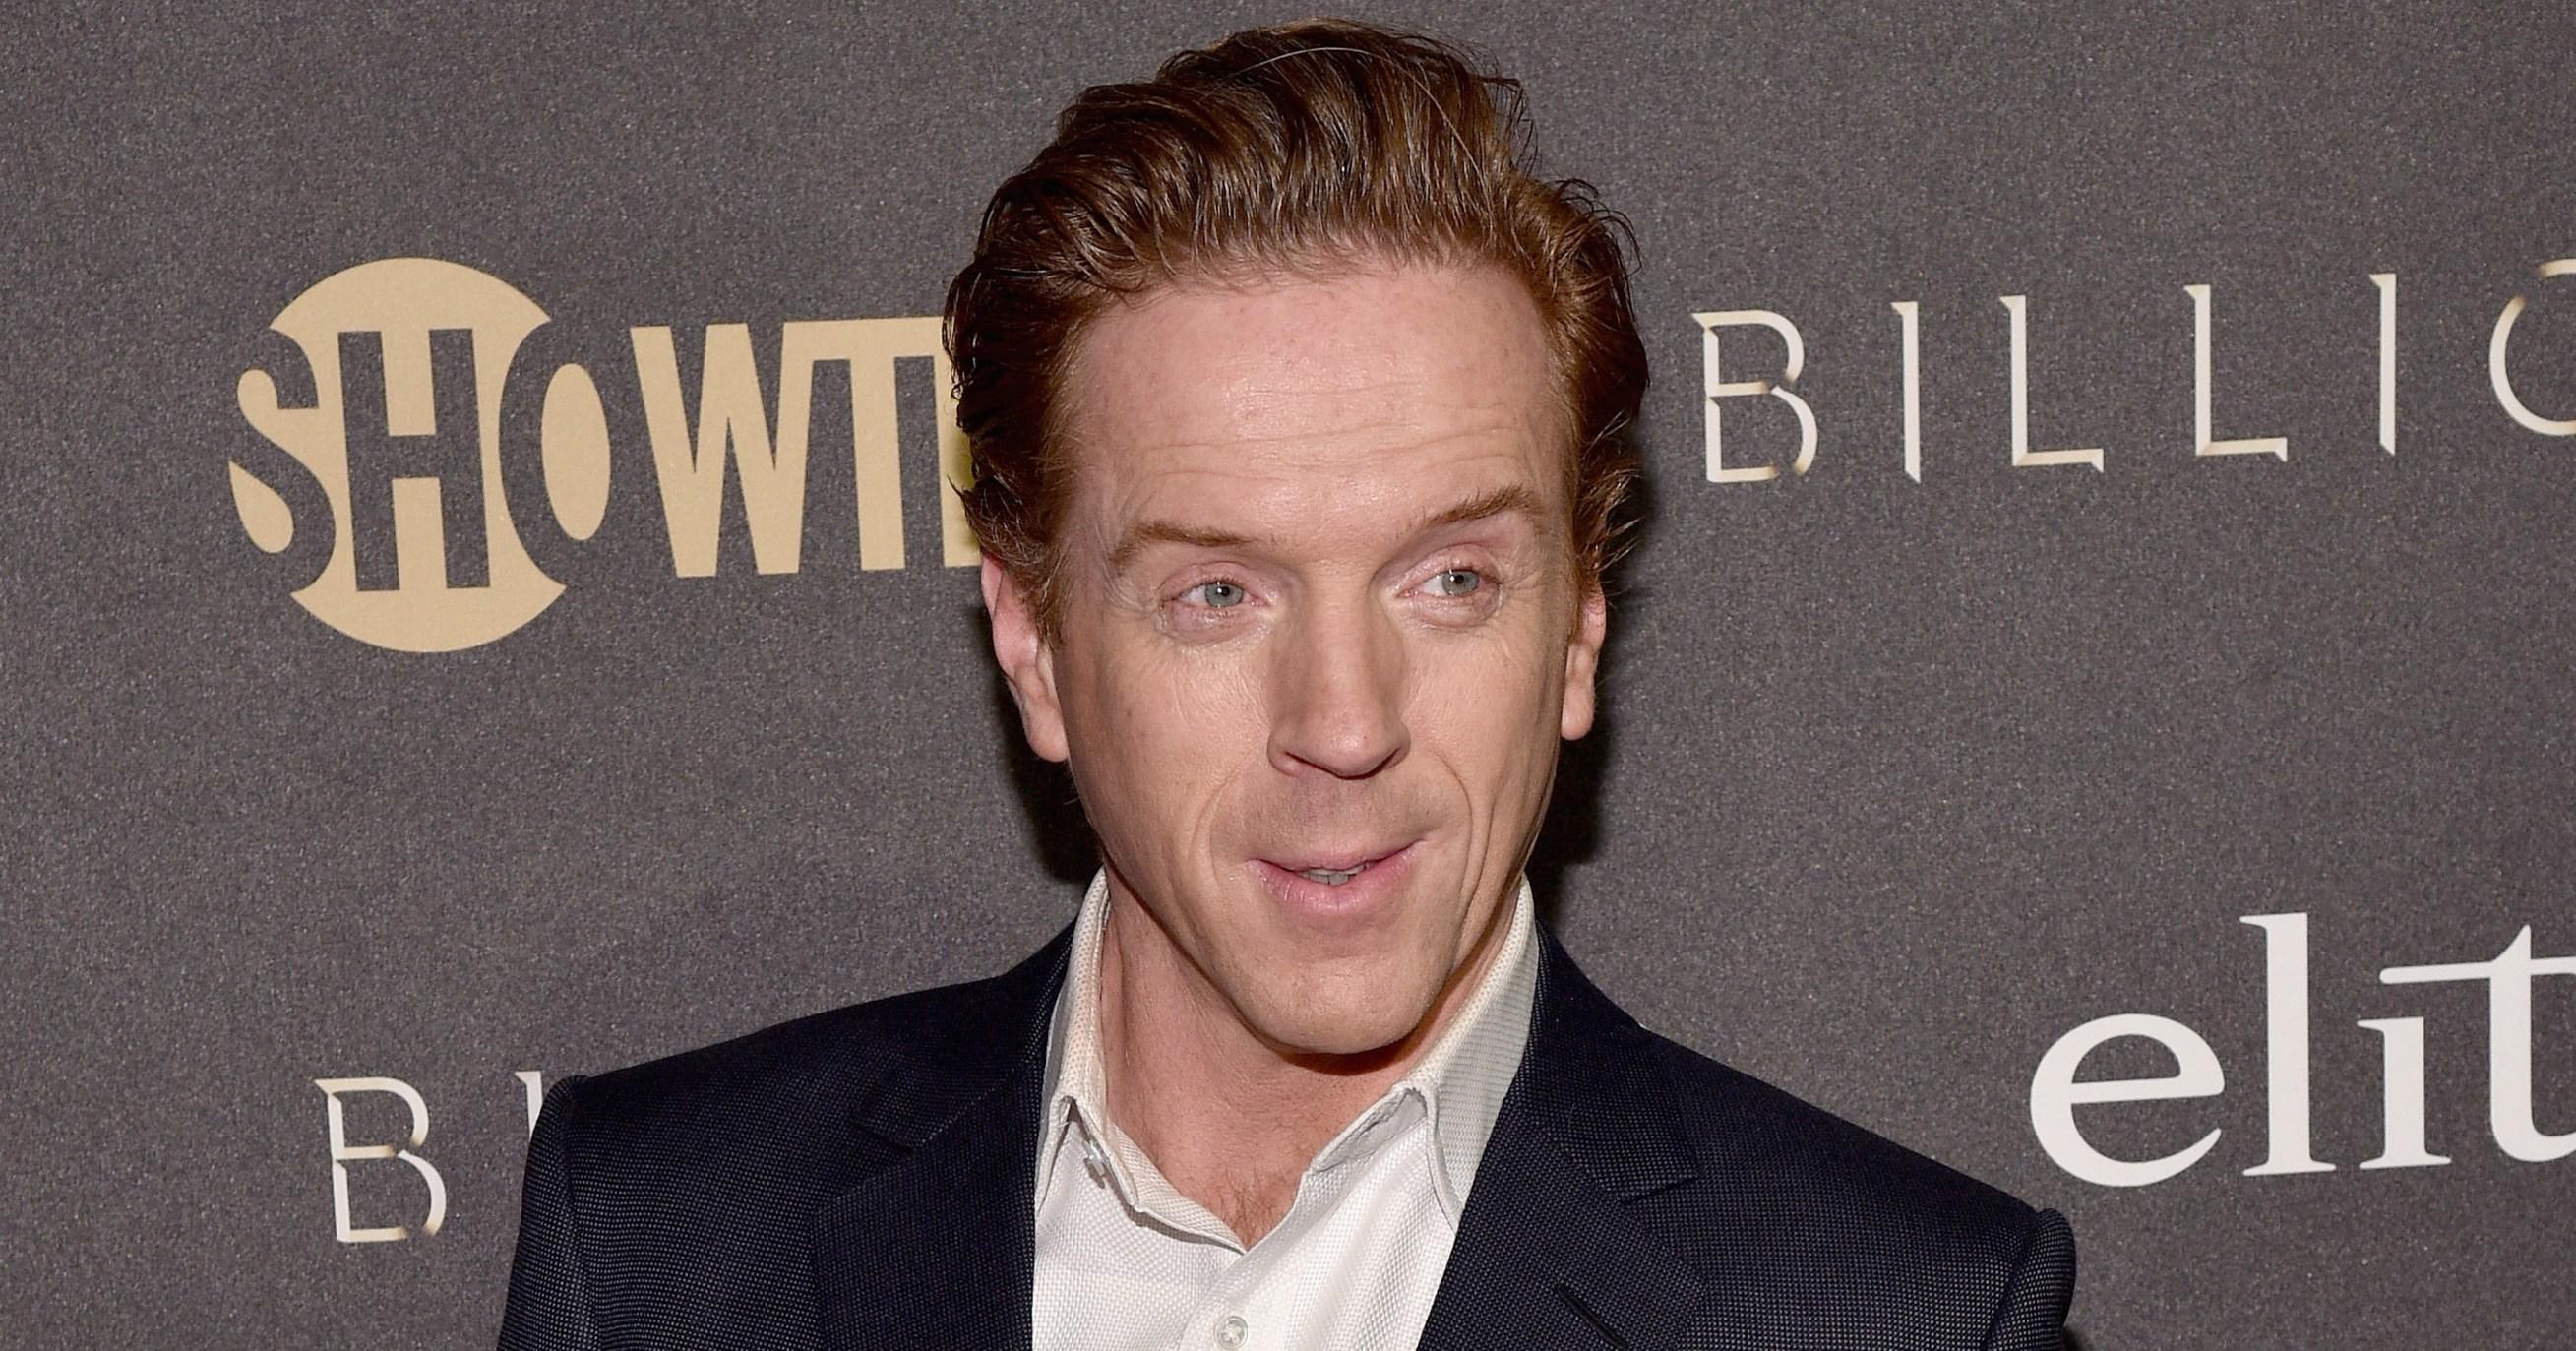  Damian Lewis attends the 'Billions' Season 2 premiere and party